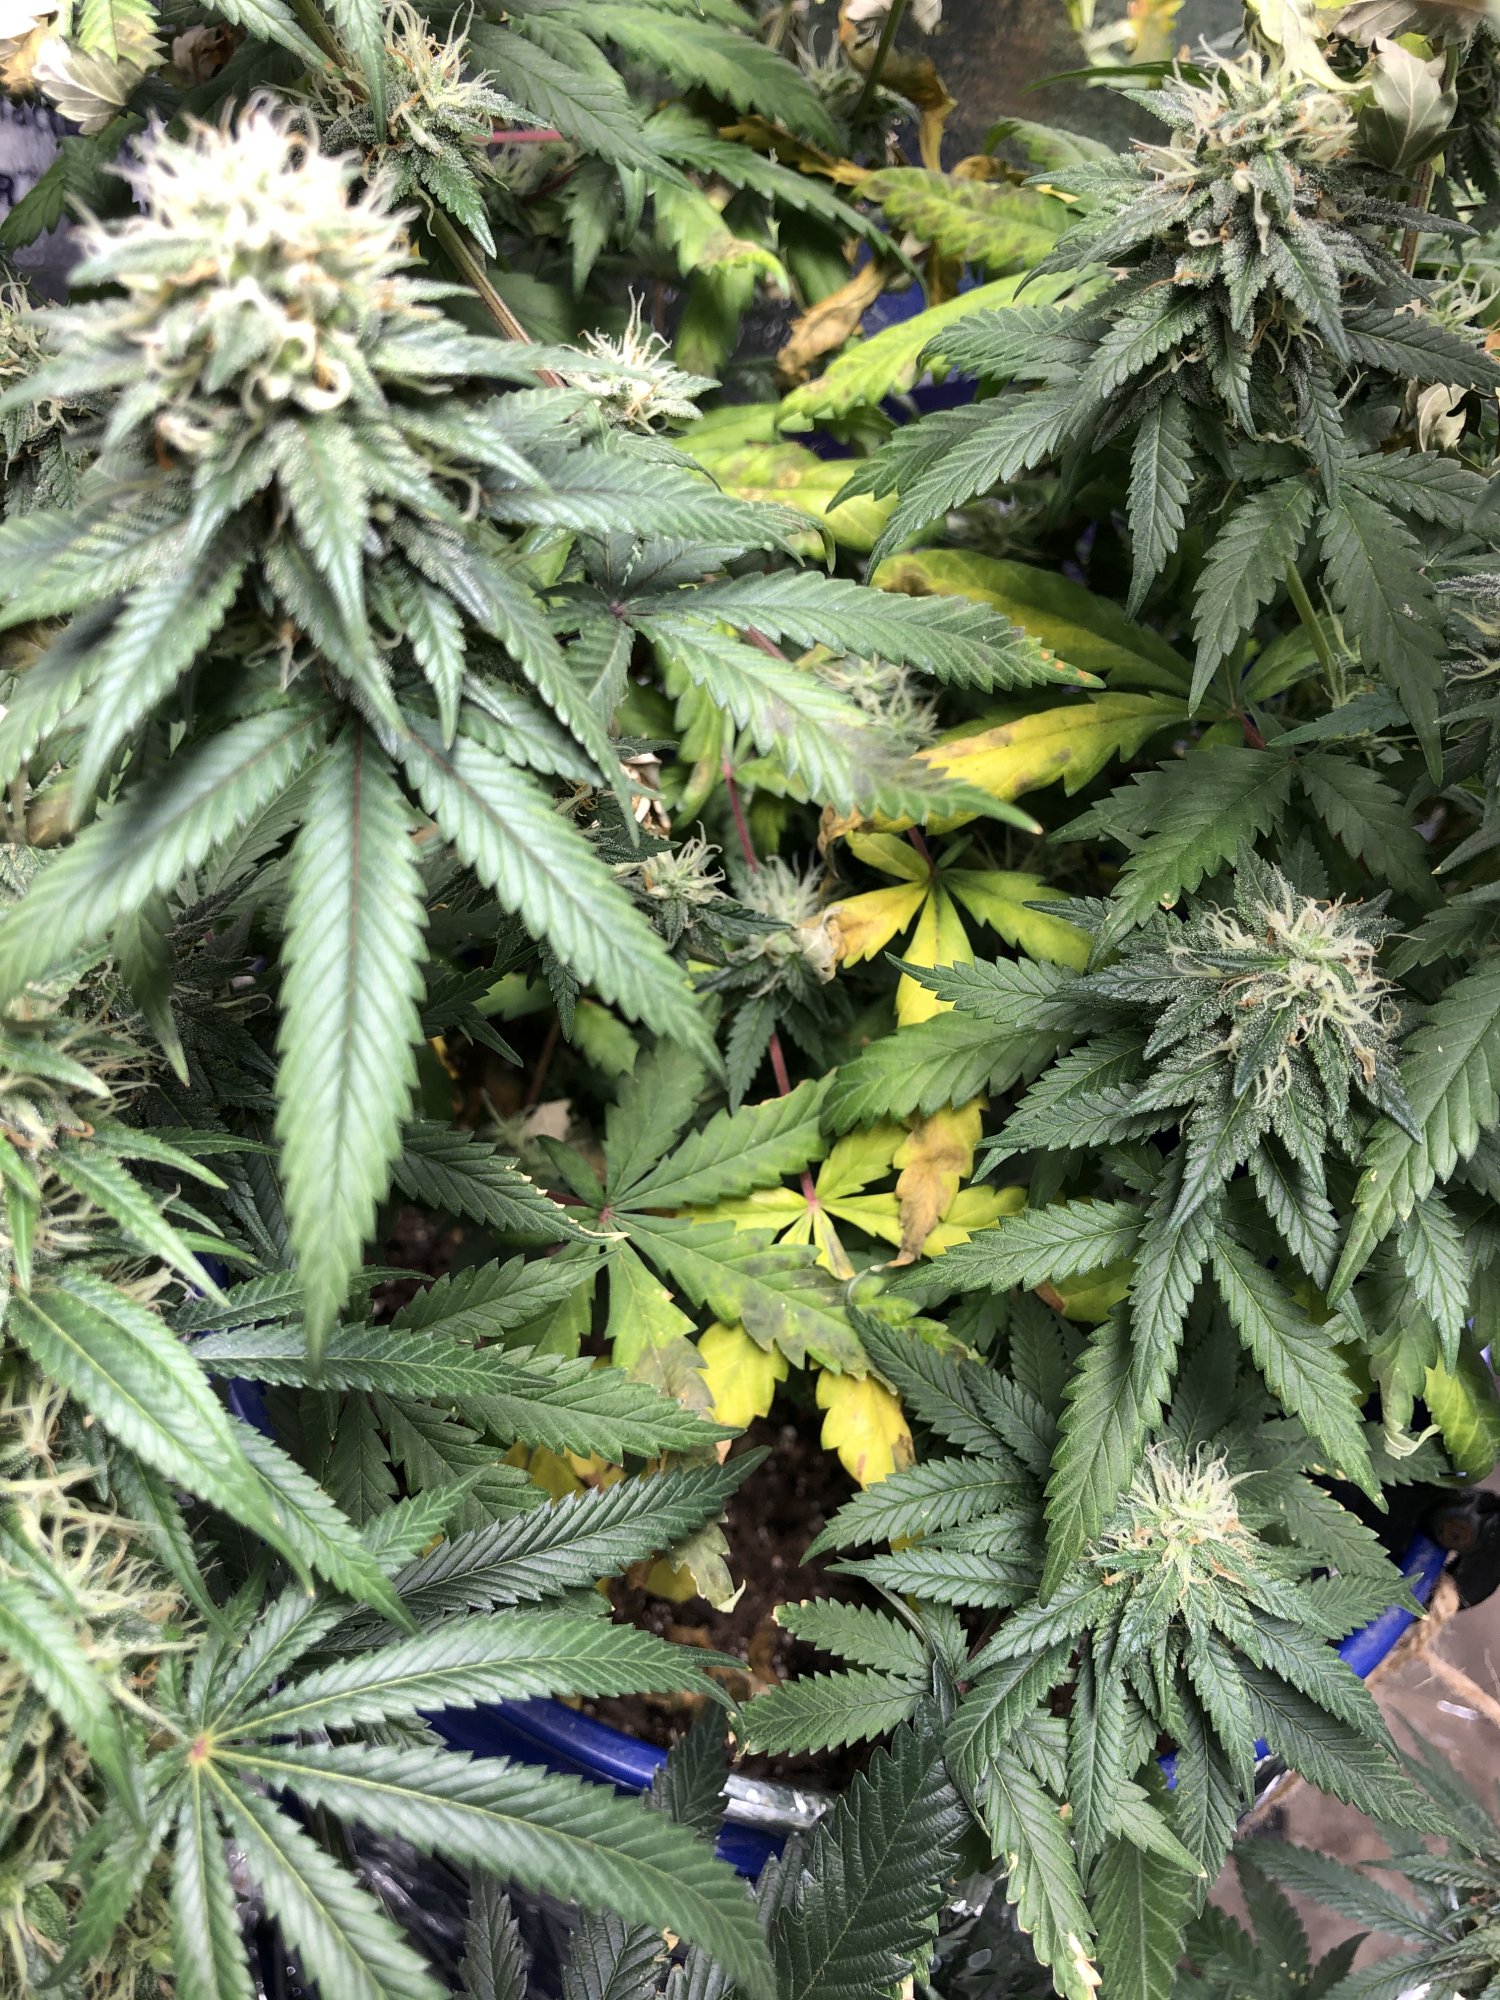 Day 48 flower w nutrient issues advice needed 6